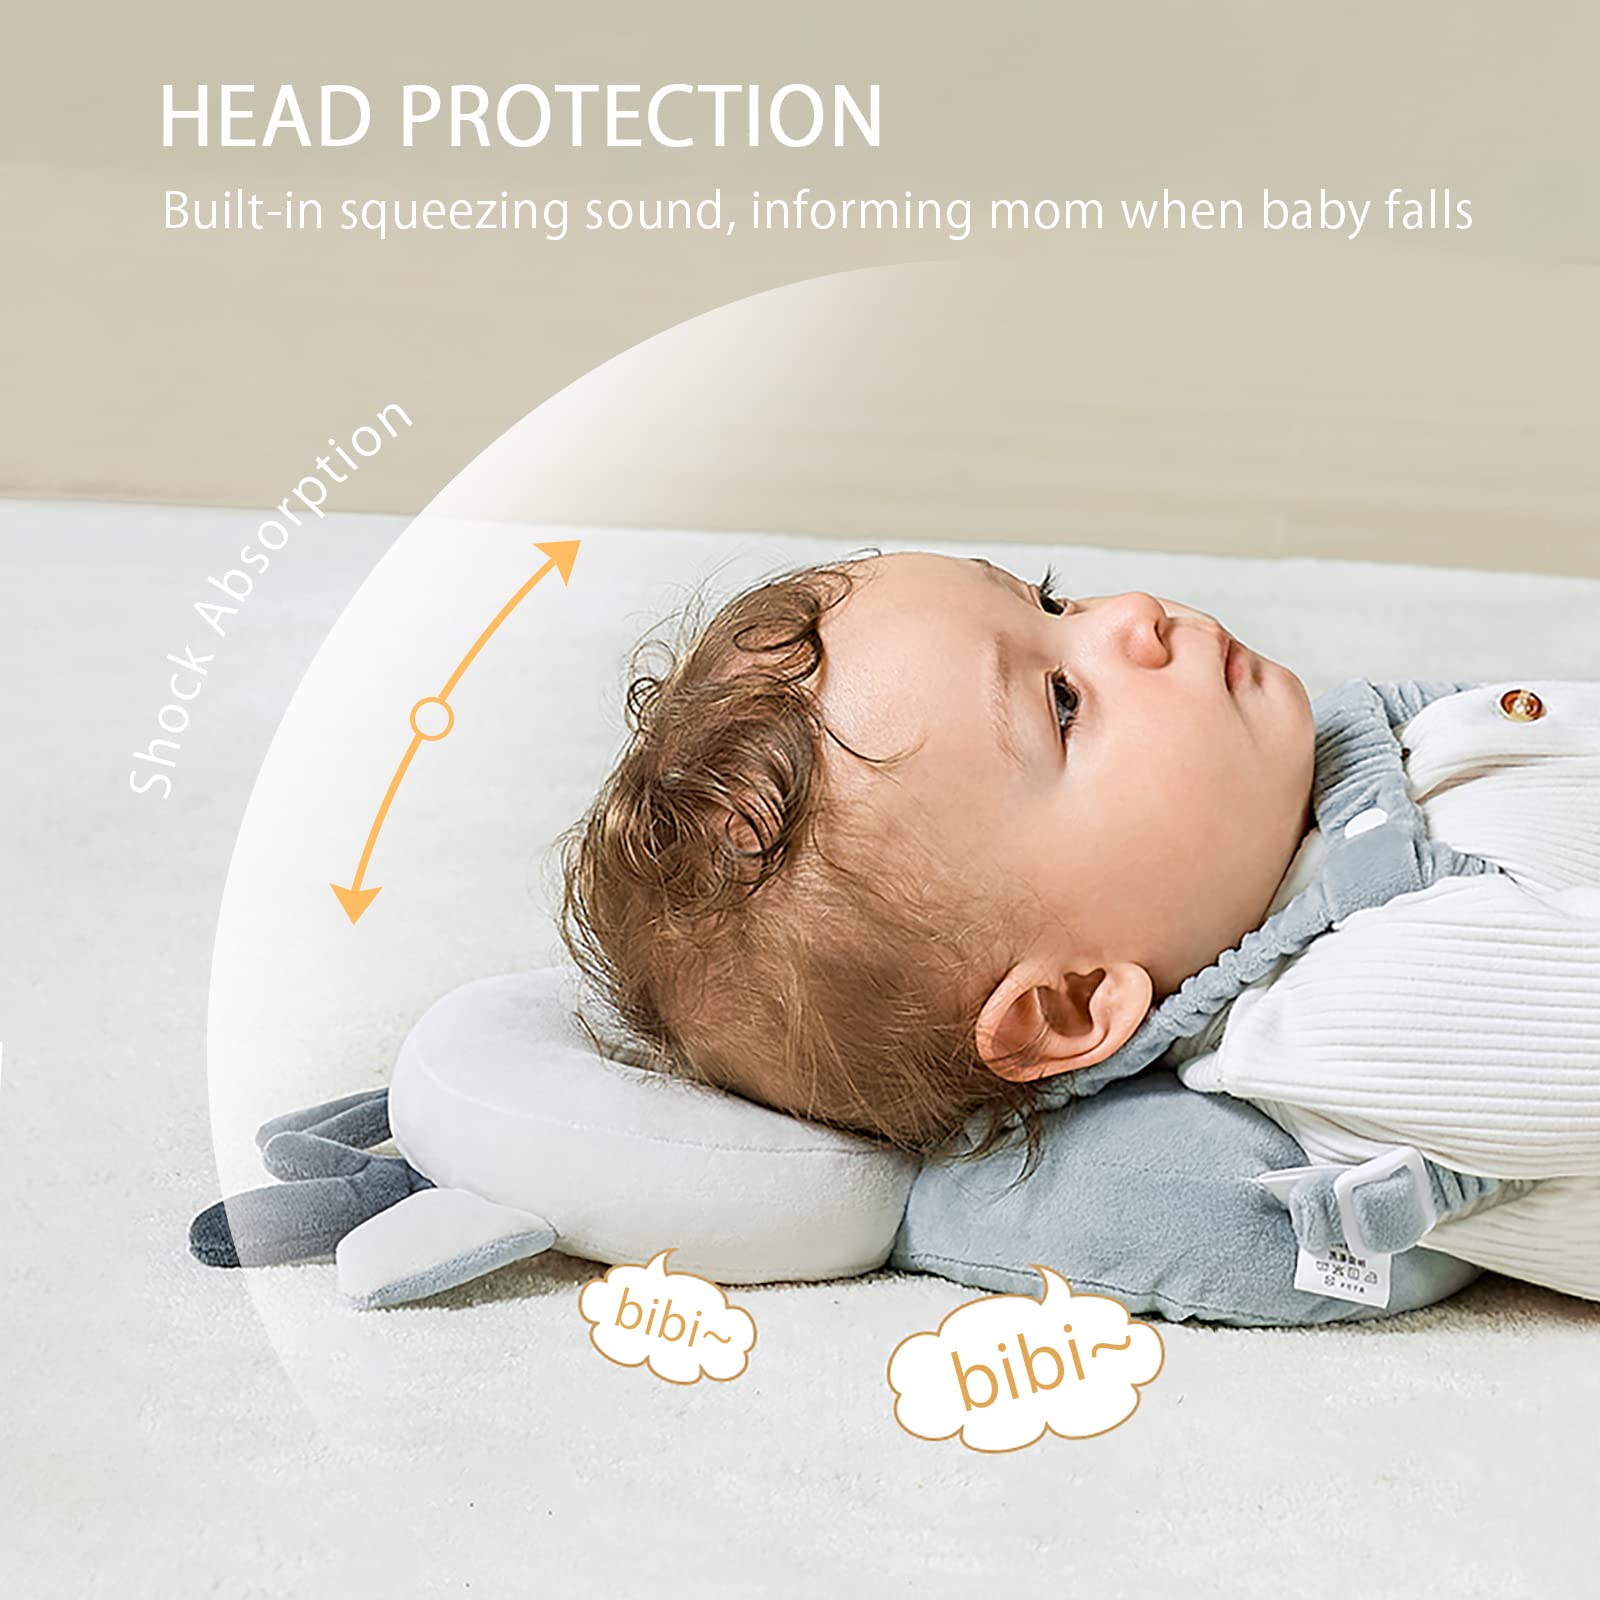 MQIFRB Baby Head Guard, Baby Fall Prevention Backpack, Anti-Tipping Helmet, Head Guard, Kids, Head Protection, Fall Prevention Cushion, Adjustable Shoulder Straps, Good Texture, Baby Supplies, Safe, Cute